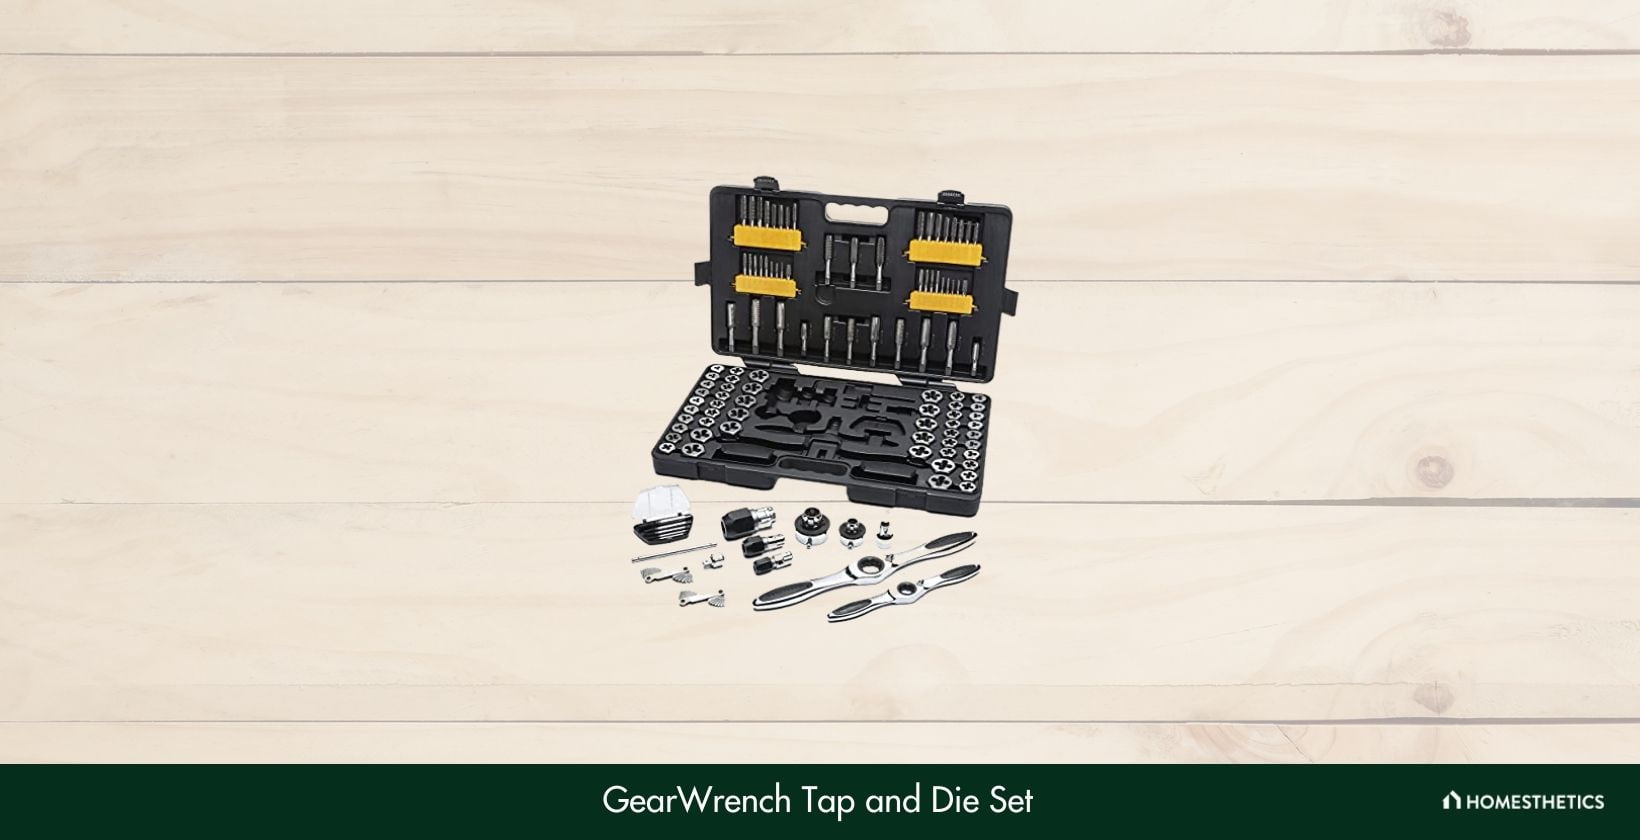 GearWrench Tap and Die Set